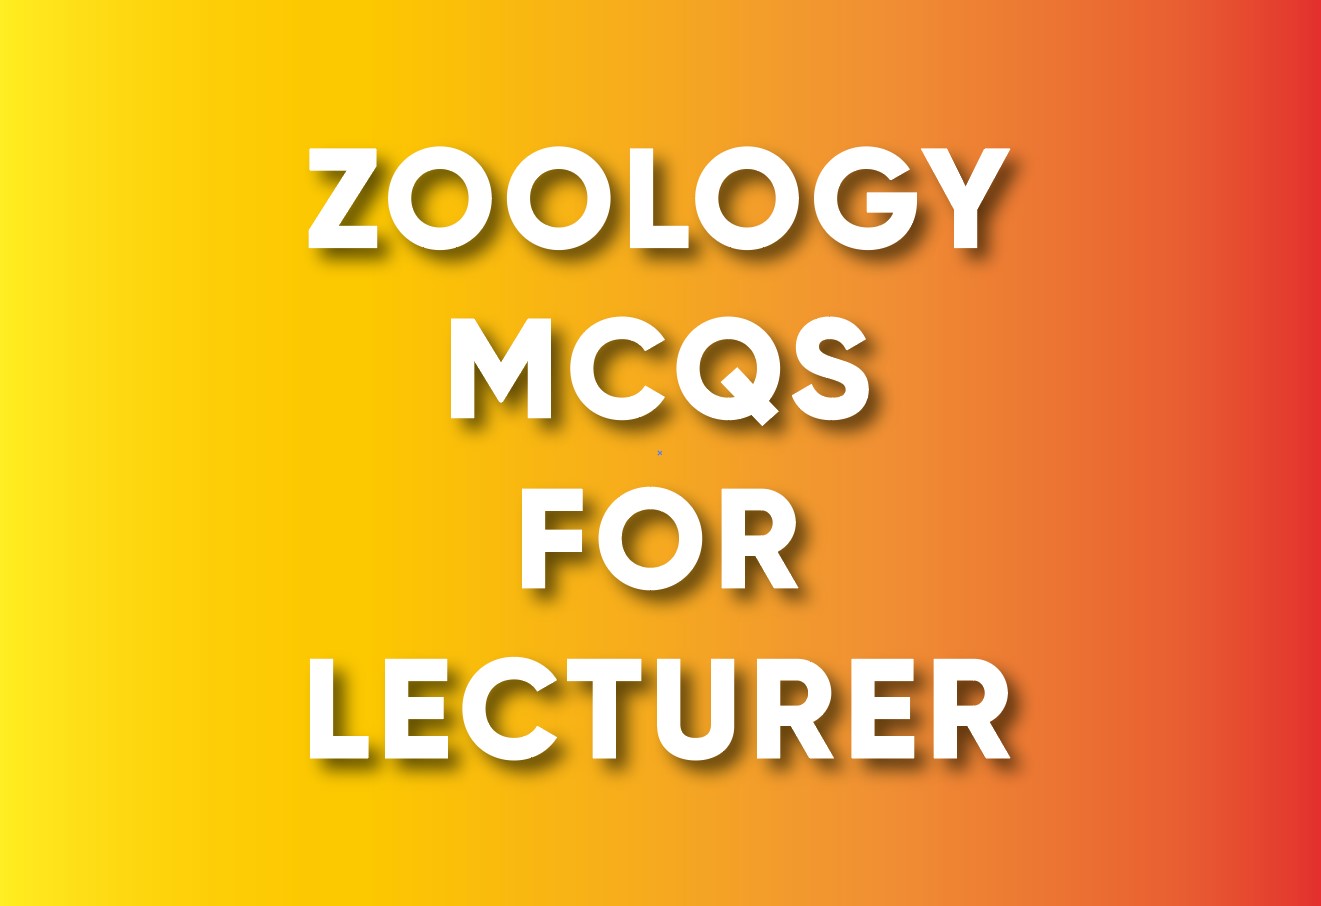 Zoology MCQs For Lecturer Test PDF